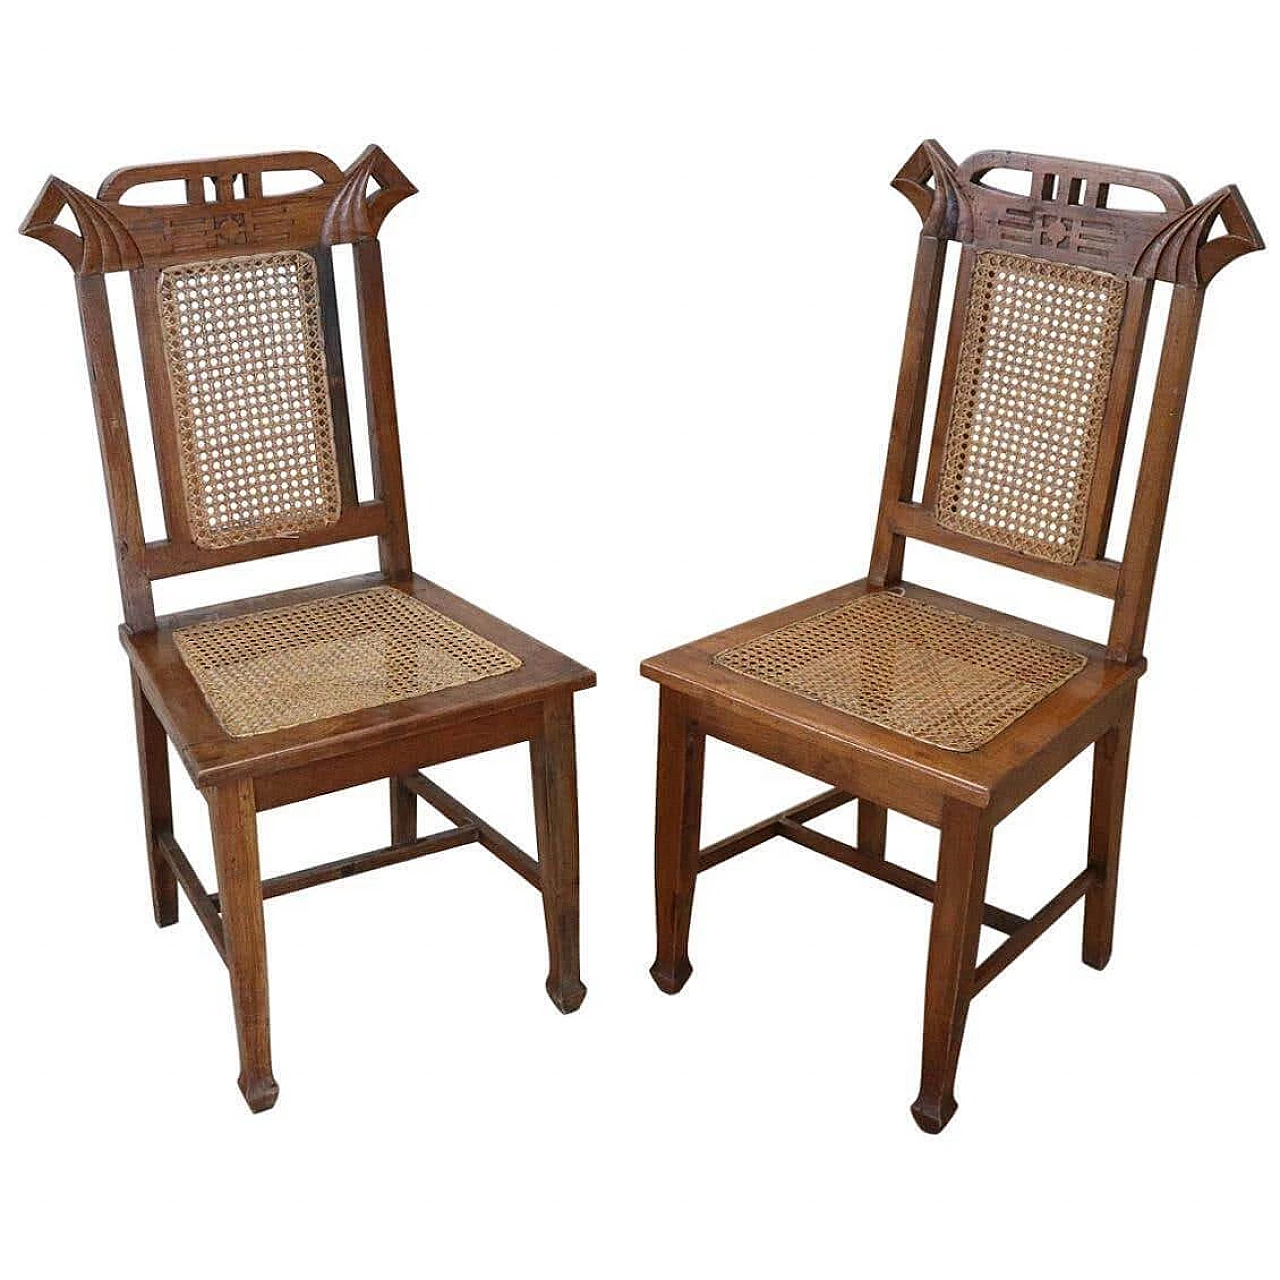 Pair of Art Nouveau chairs in oak and Vienna straw 1284094